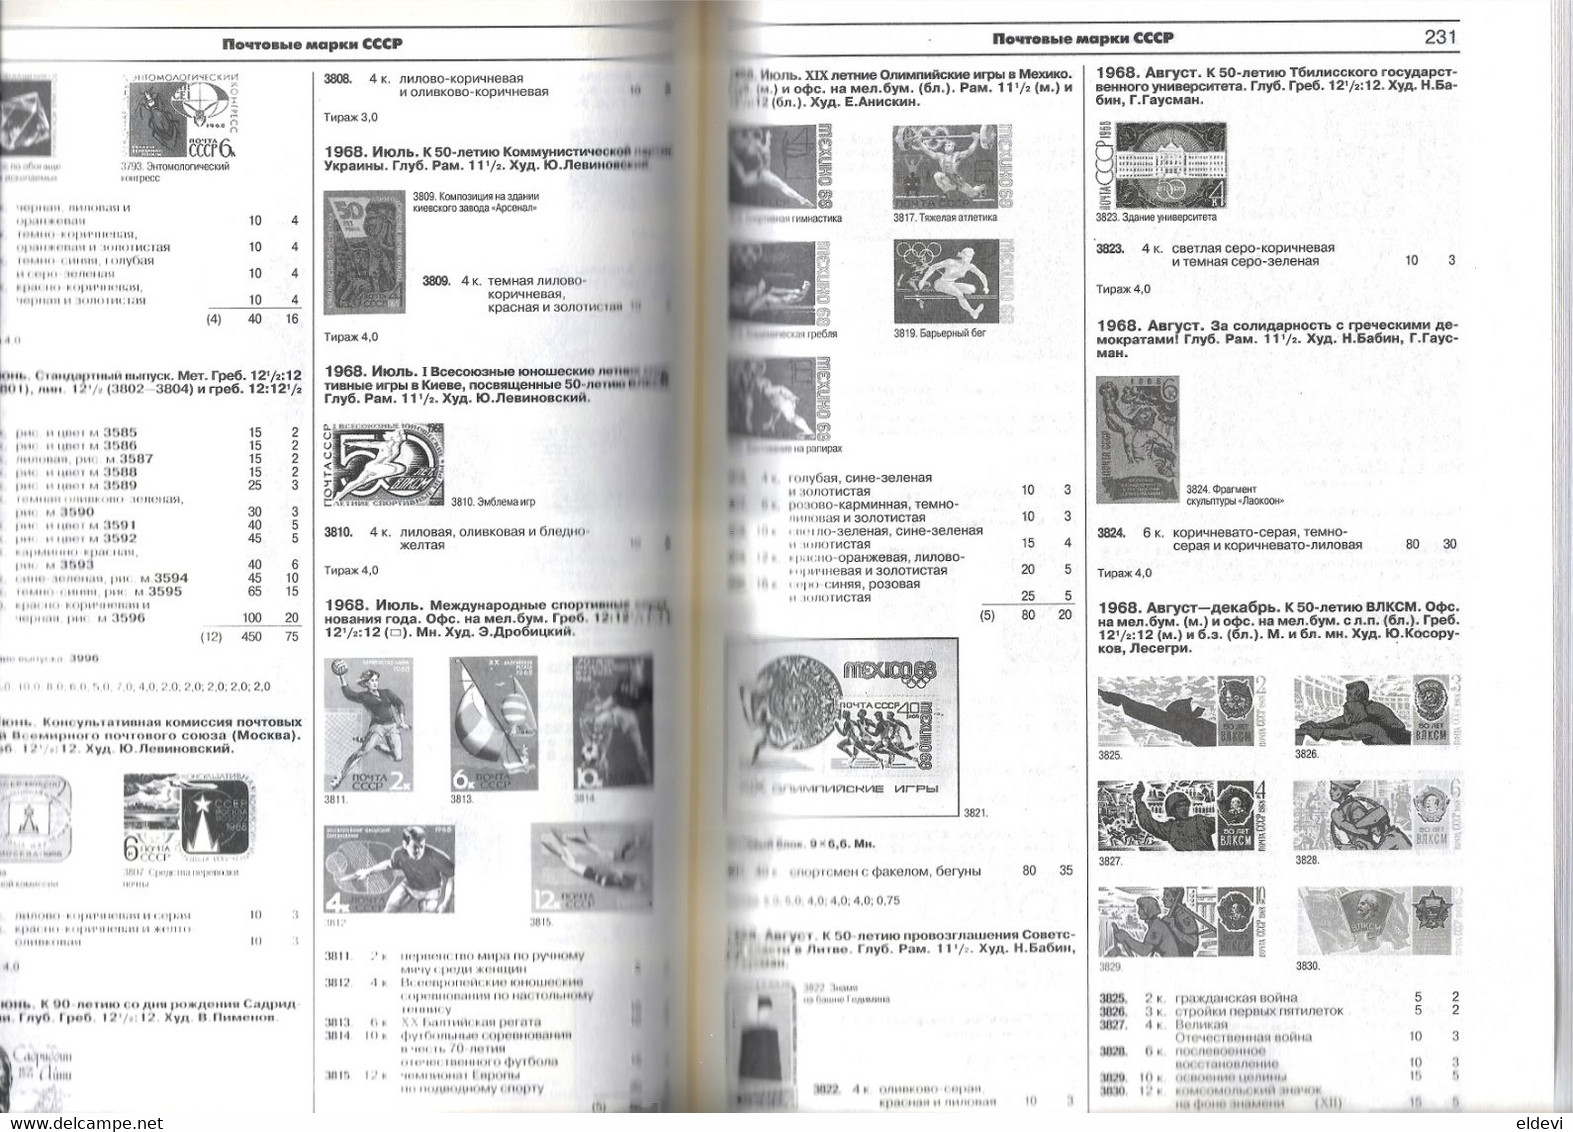 Russia (USSR) Postage Stamps CATALOG 1857-1995 / Black/white / FREE SHIPPING - Collezioni